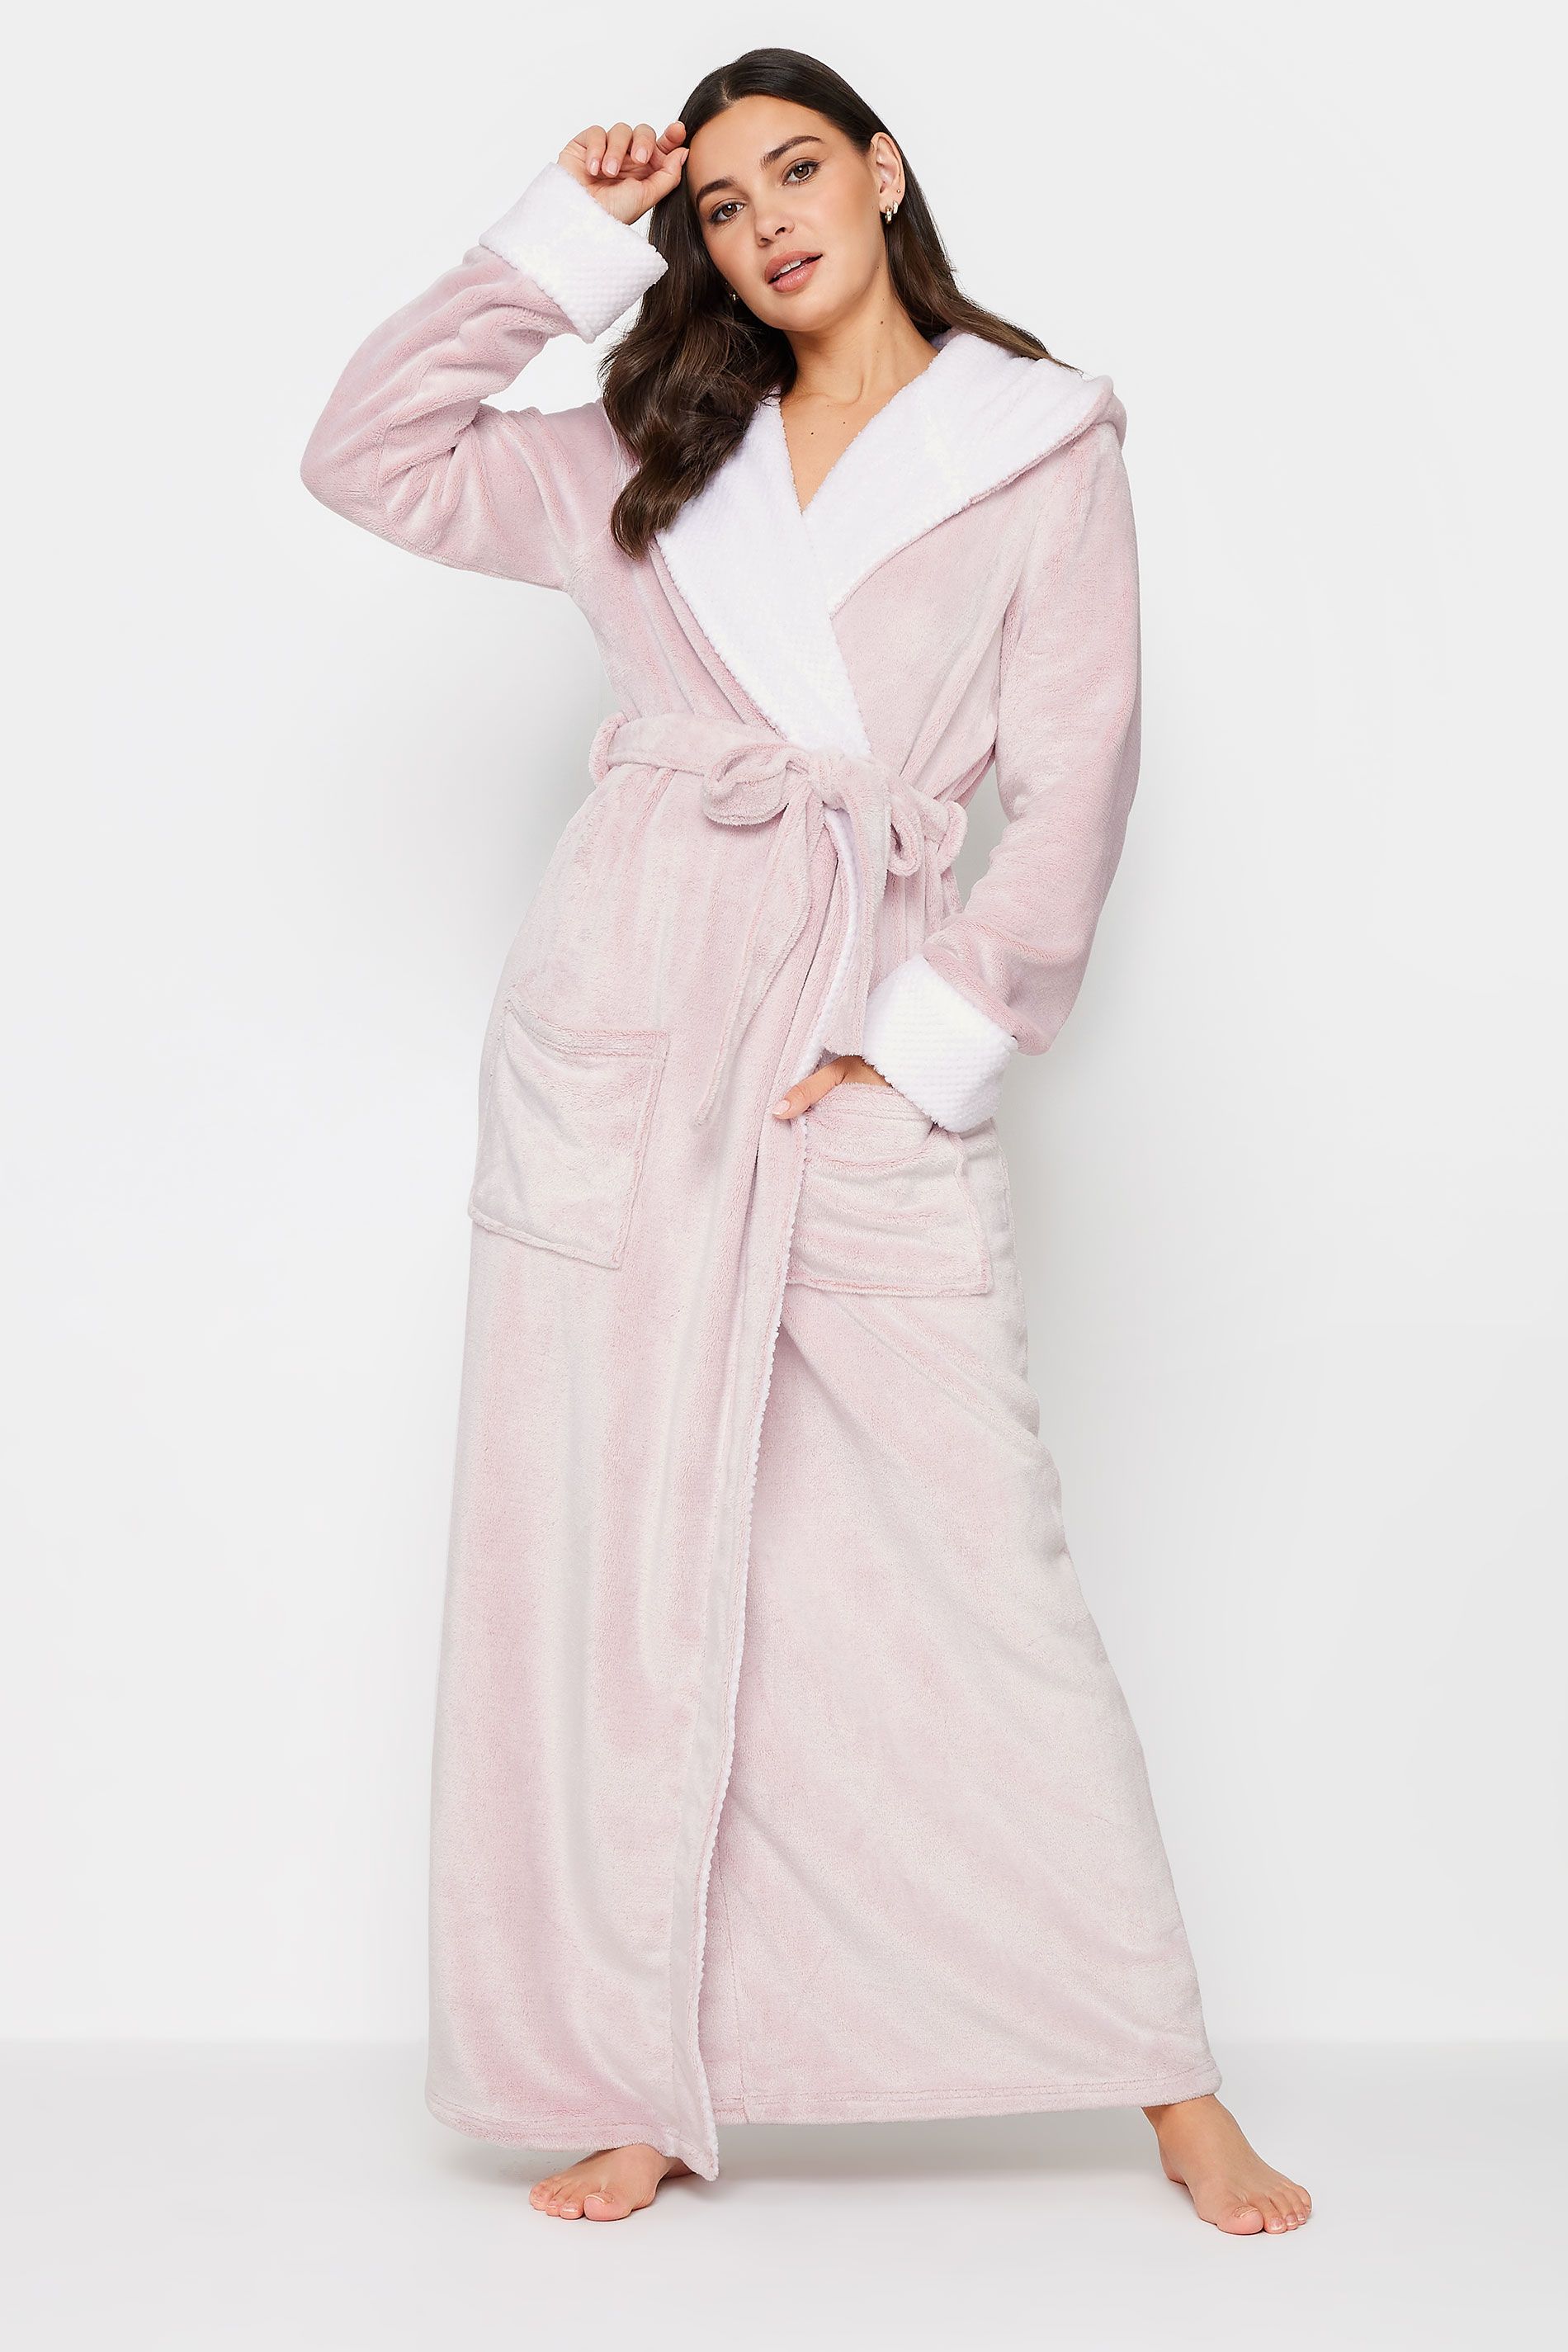 LTS Tall Light Pink Hooded Maxi Dressing Gown | Long Tall Sally